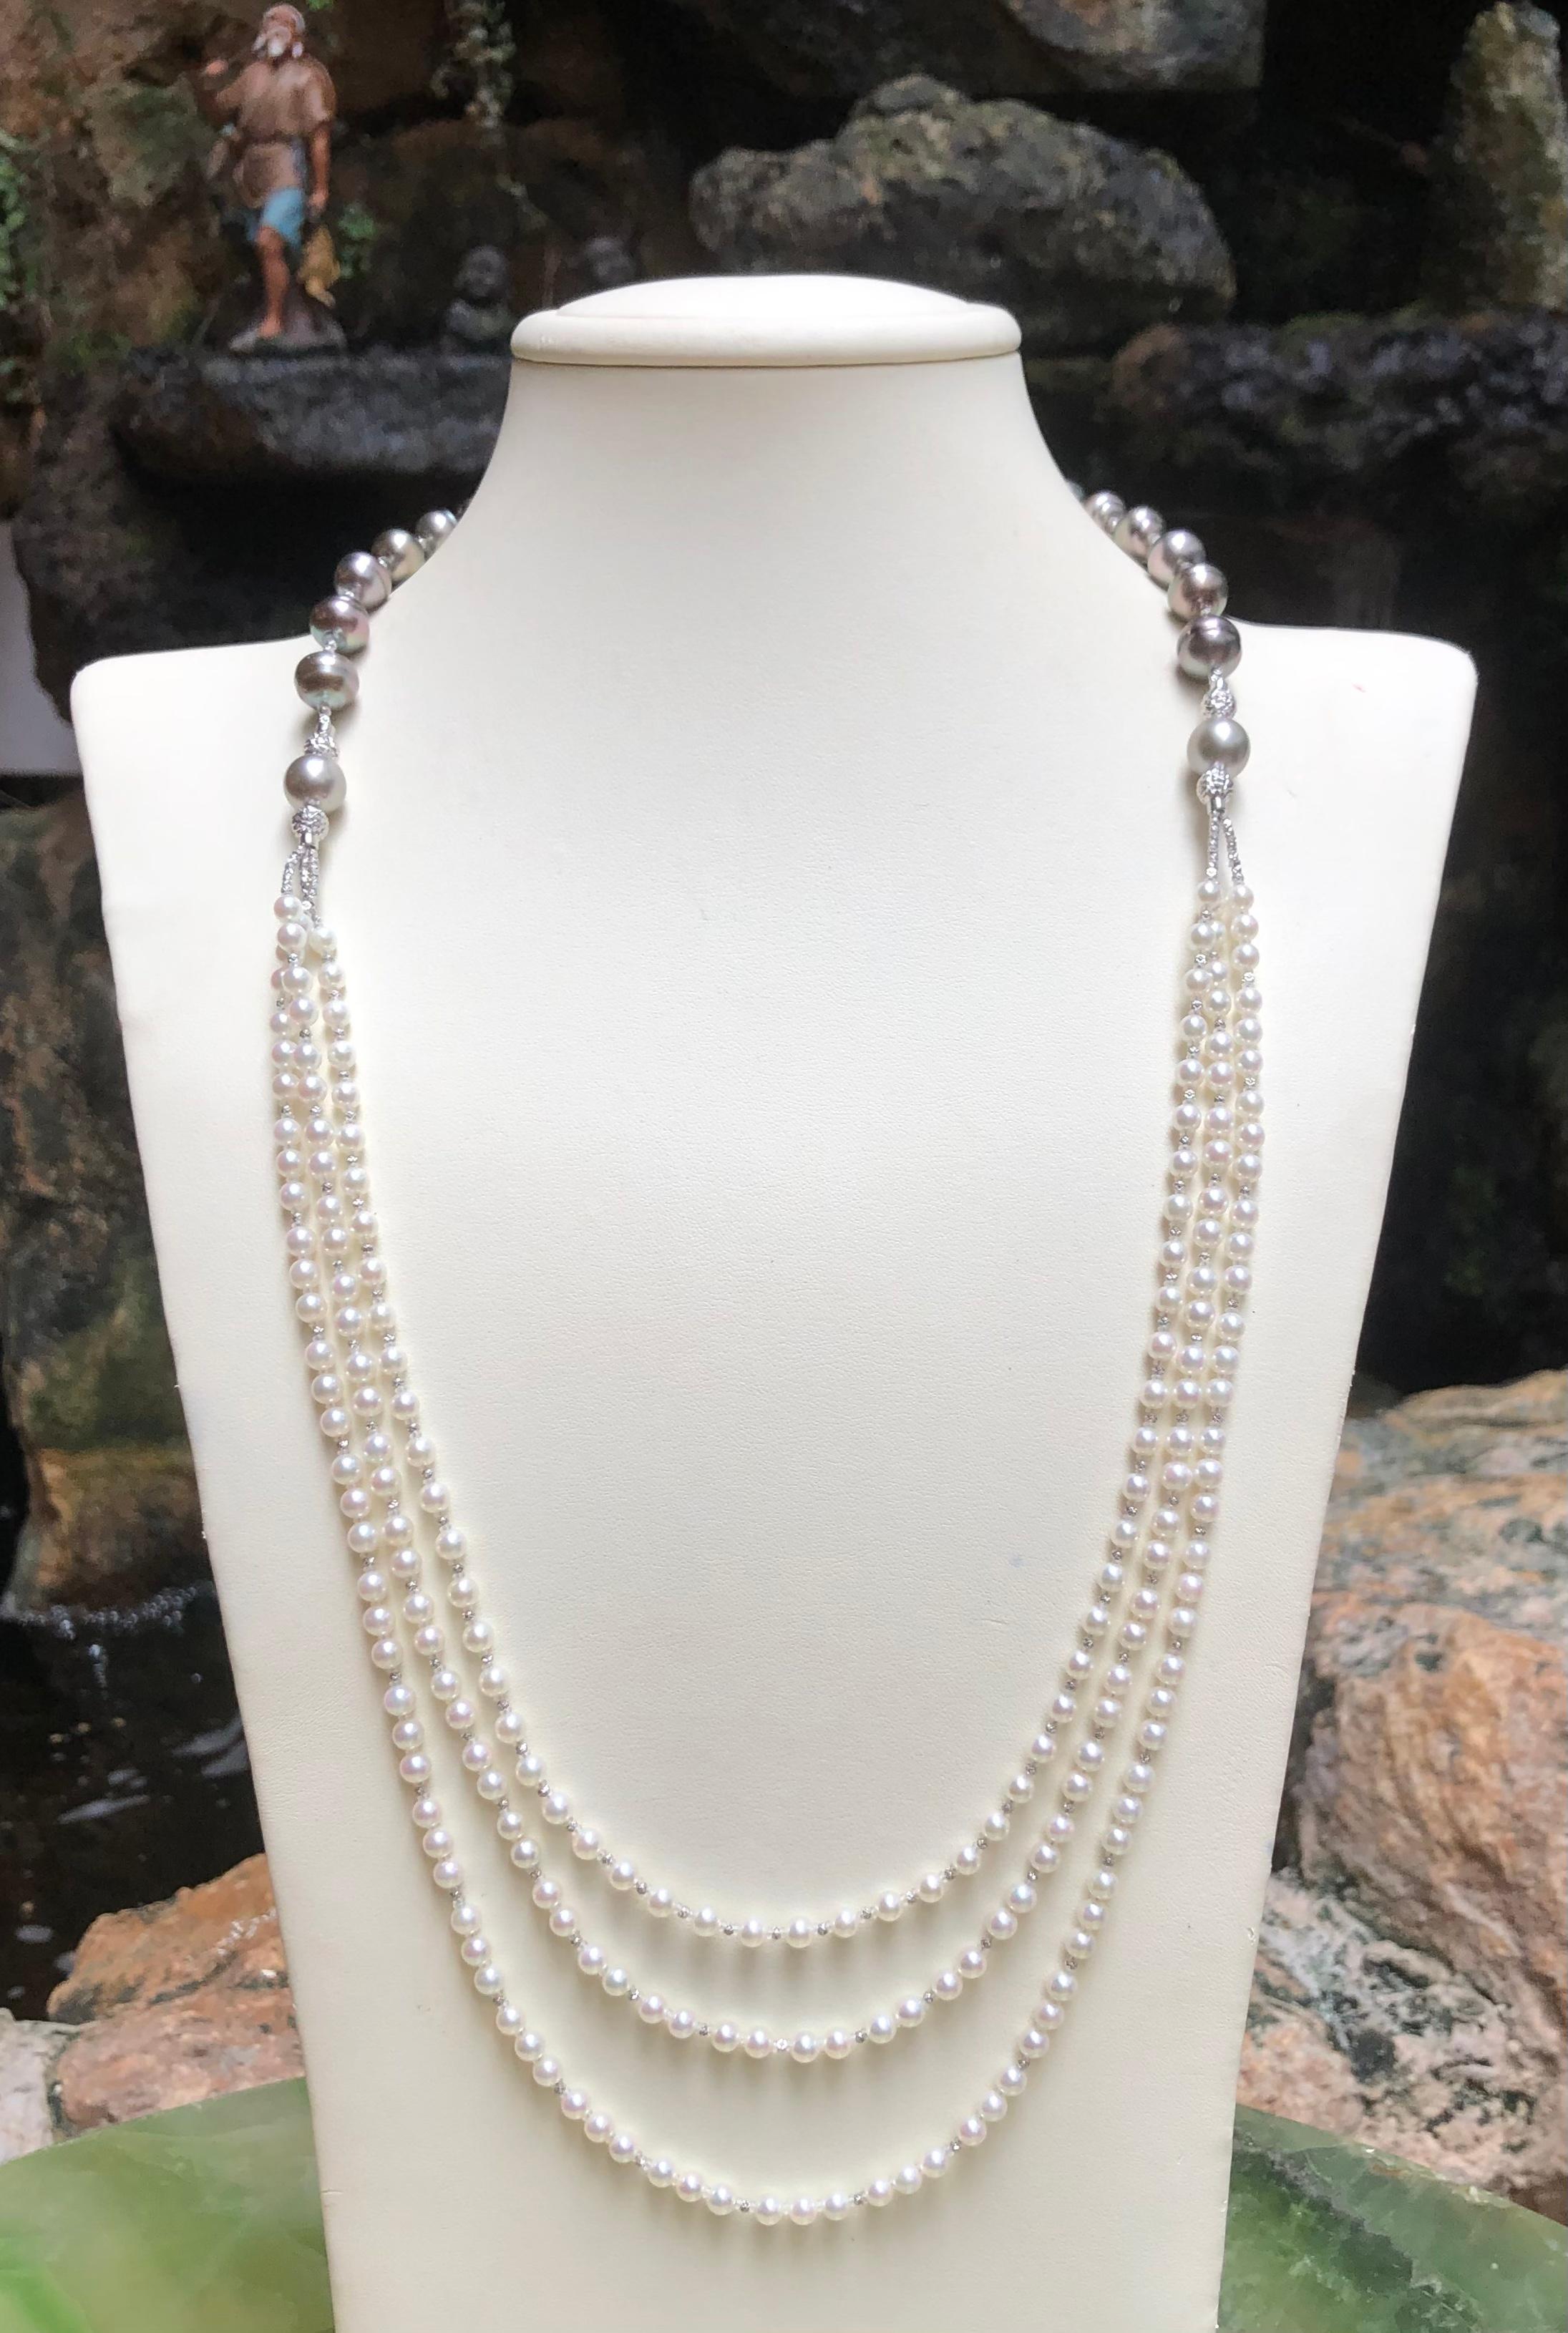 South Sea Pearl with Akoya Pearl Necklace set in 18 Karat White Gold Settings

Width: 1.0 cm 
Length: 82.0 cm (32.5